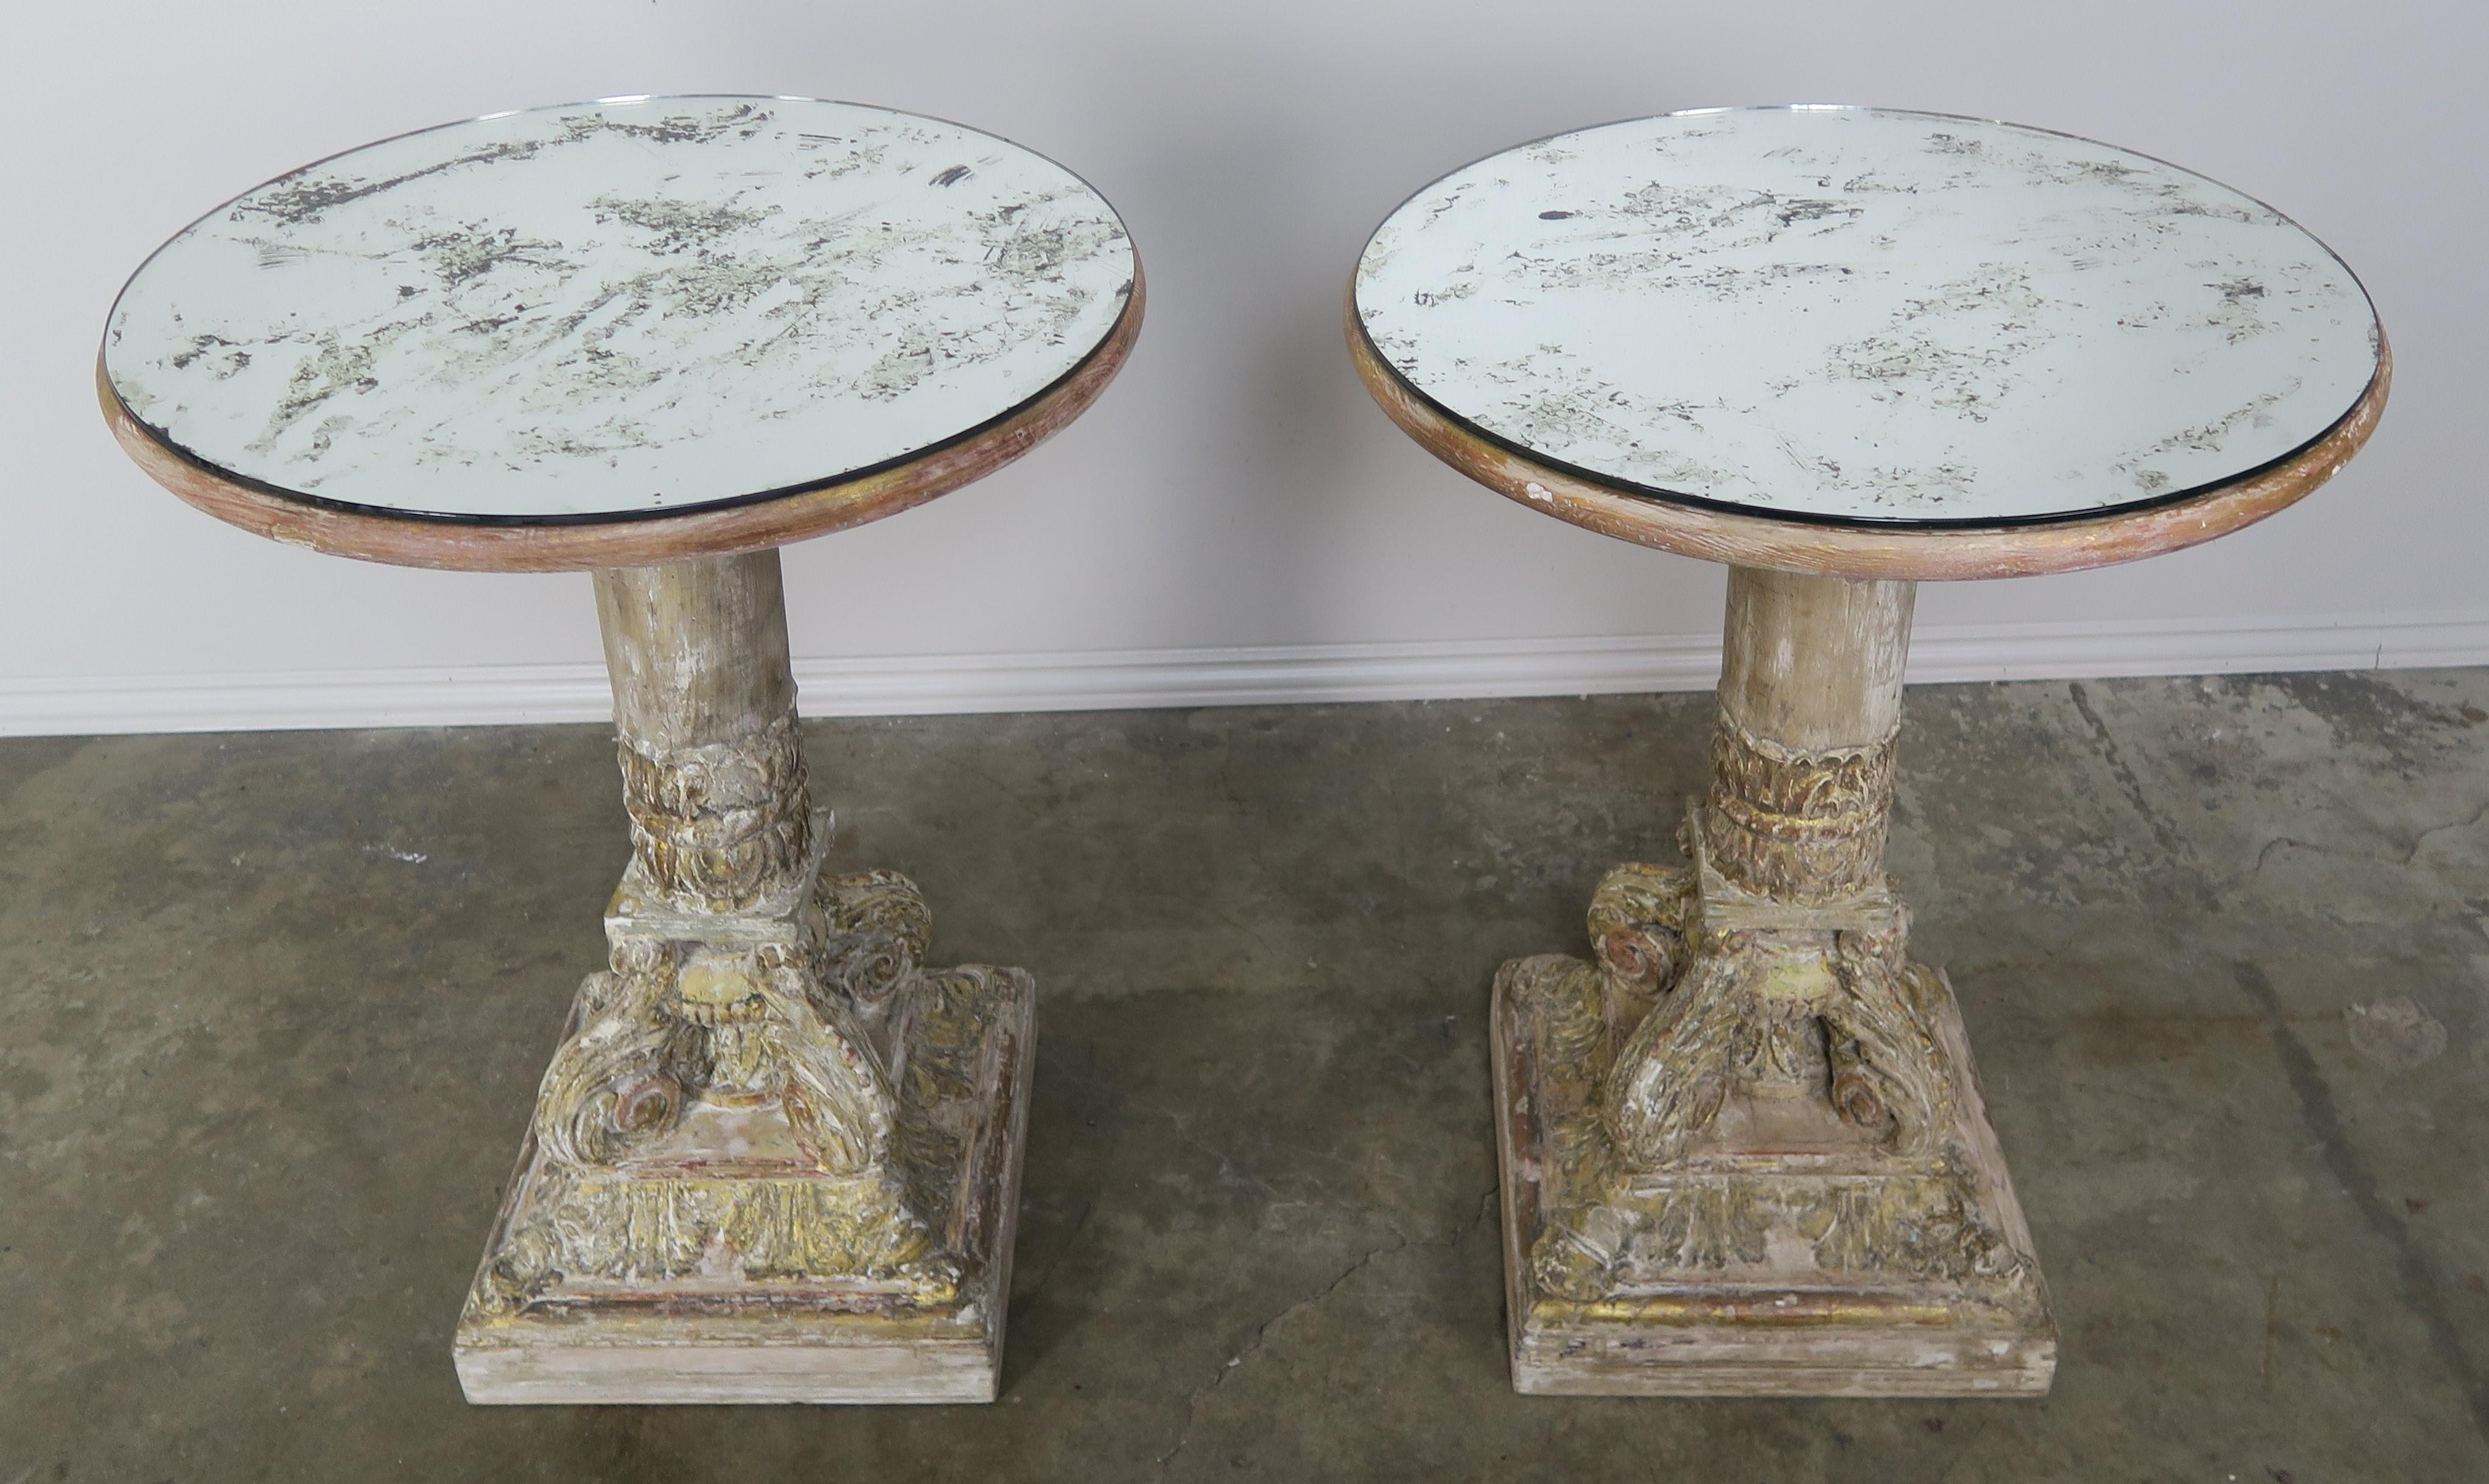 Pair of carved wood and parcel gilt side tables with antiqued mirrored tops. The tables have a beautiful worn finish with remnants of gold leaf on the raised portions of the carving.